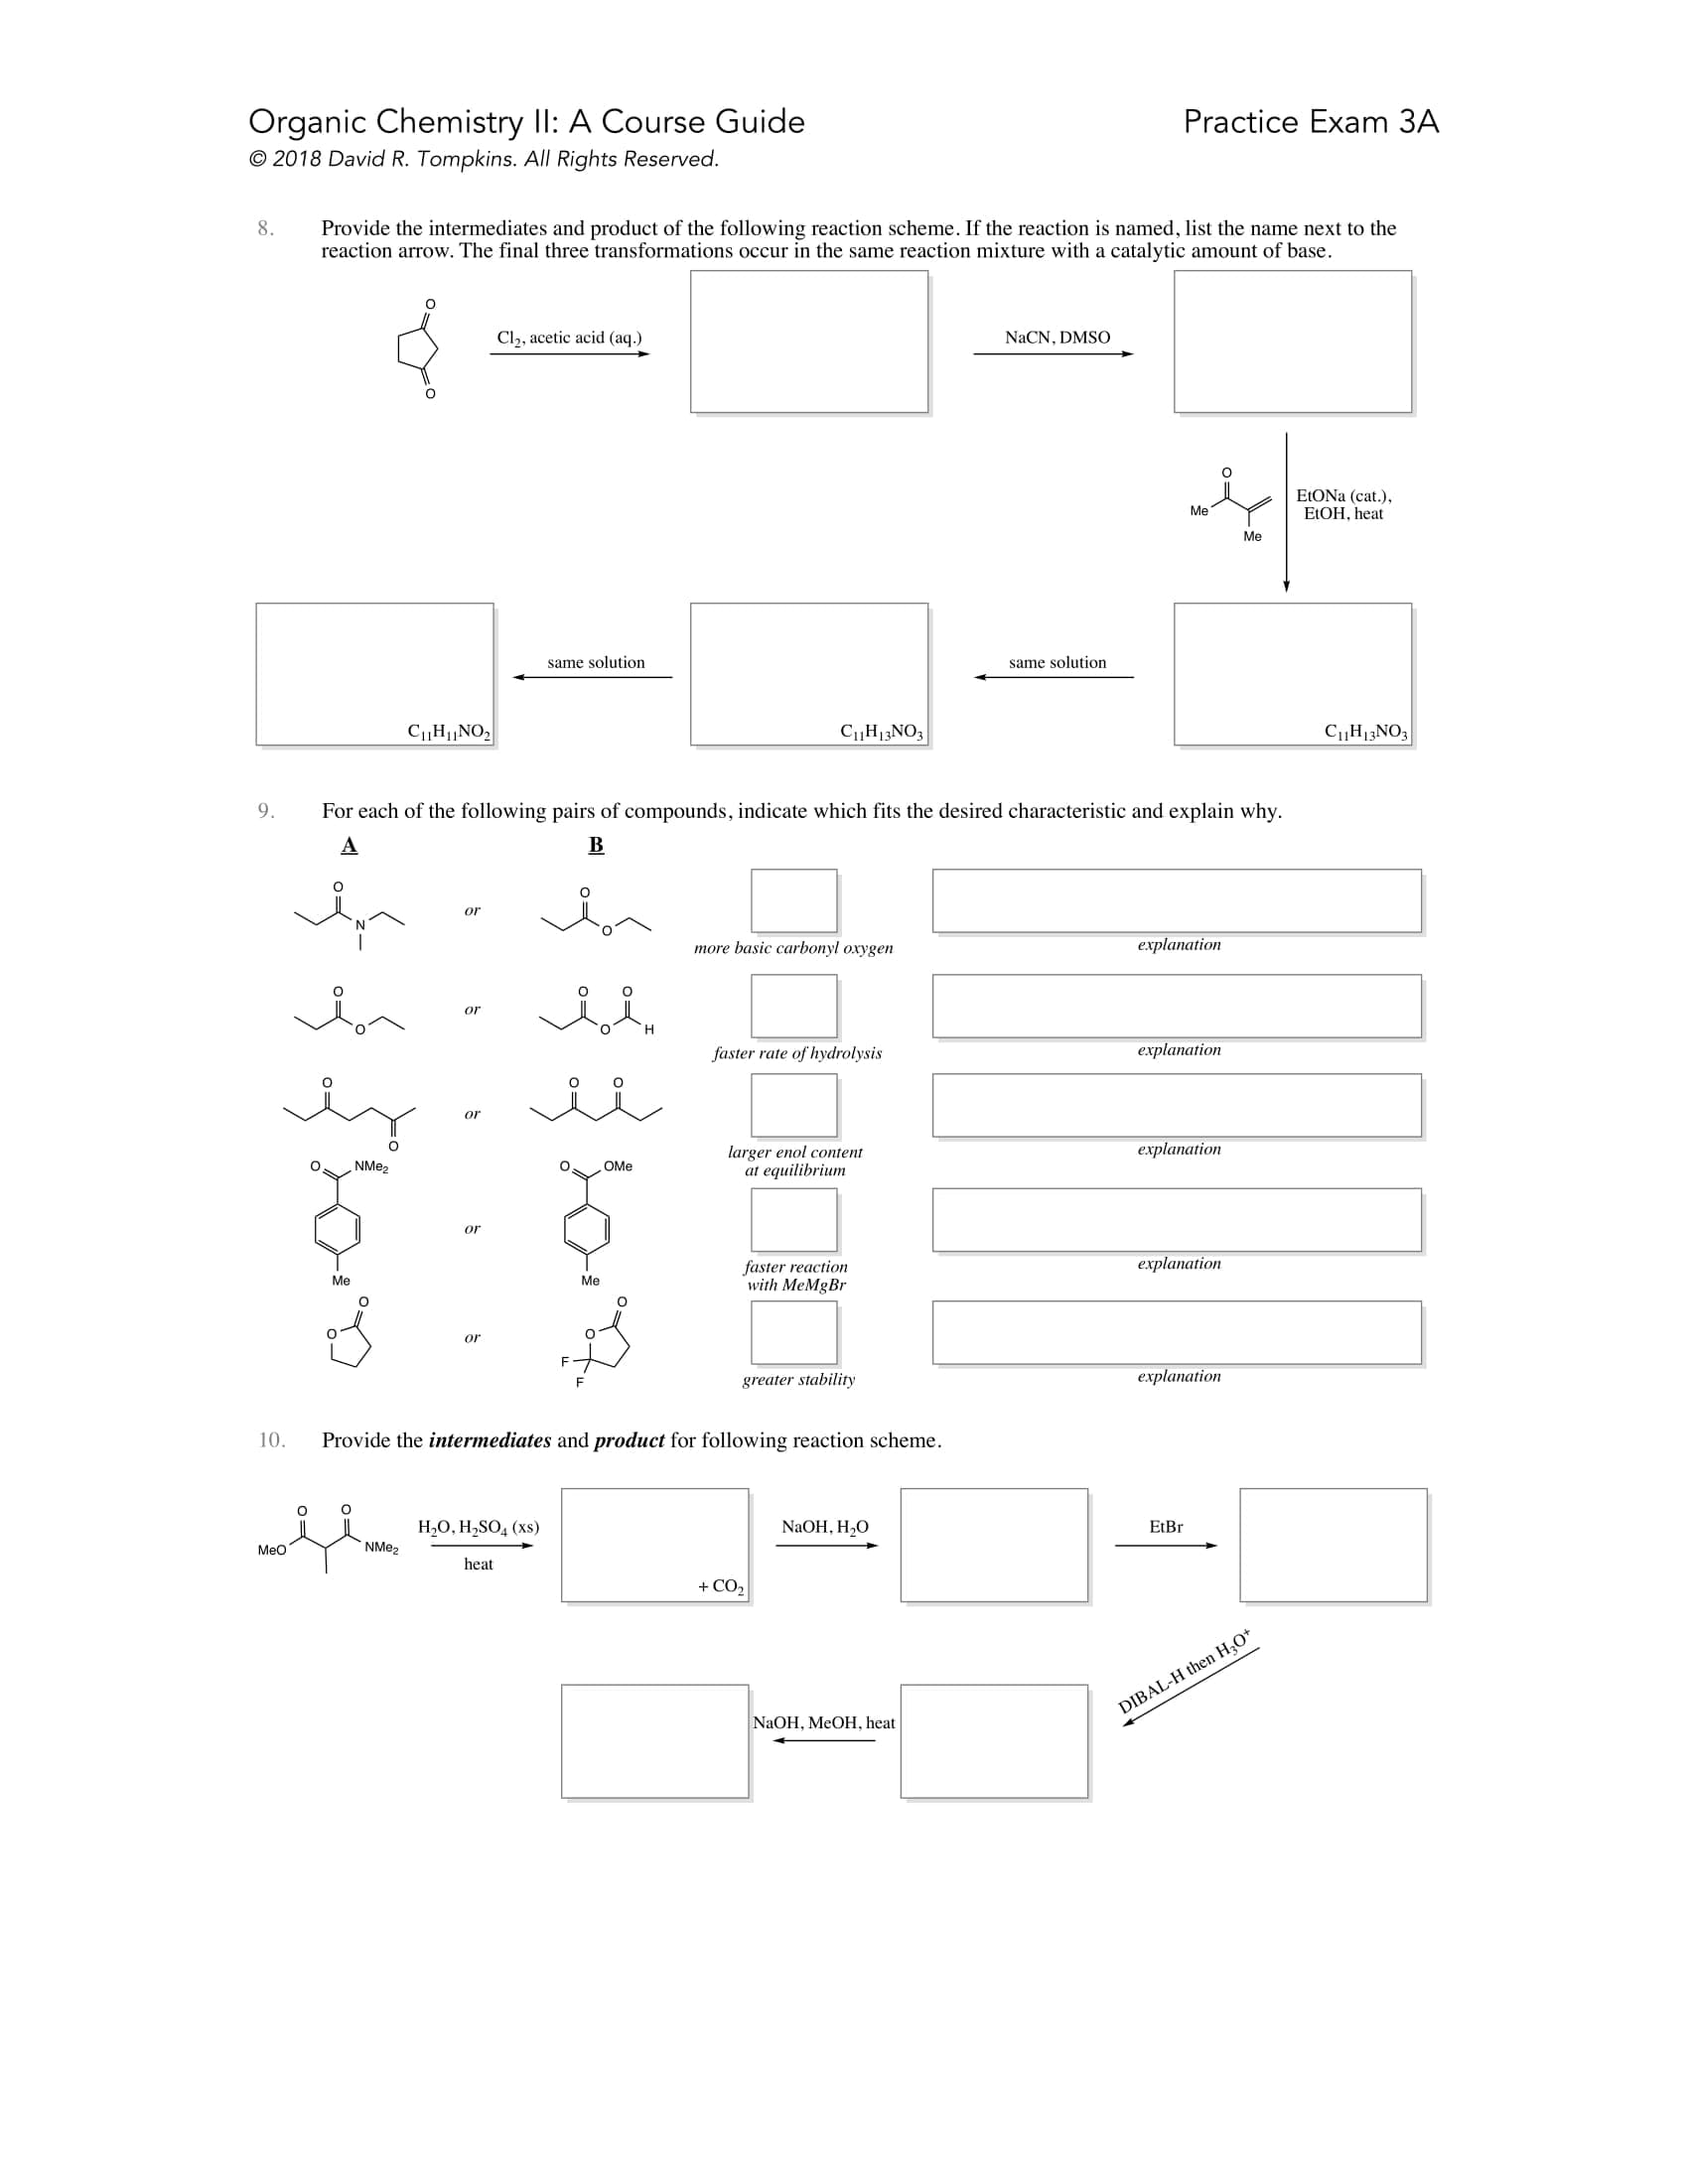 Introduction to Organic Chemistry II Course Guide Example Page 5